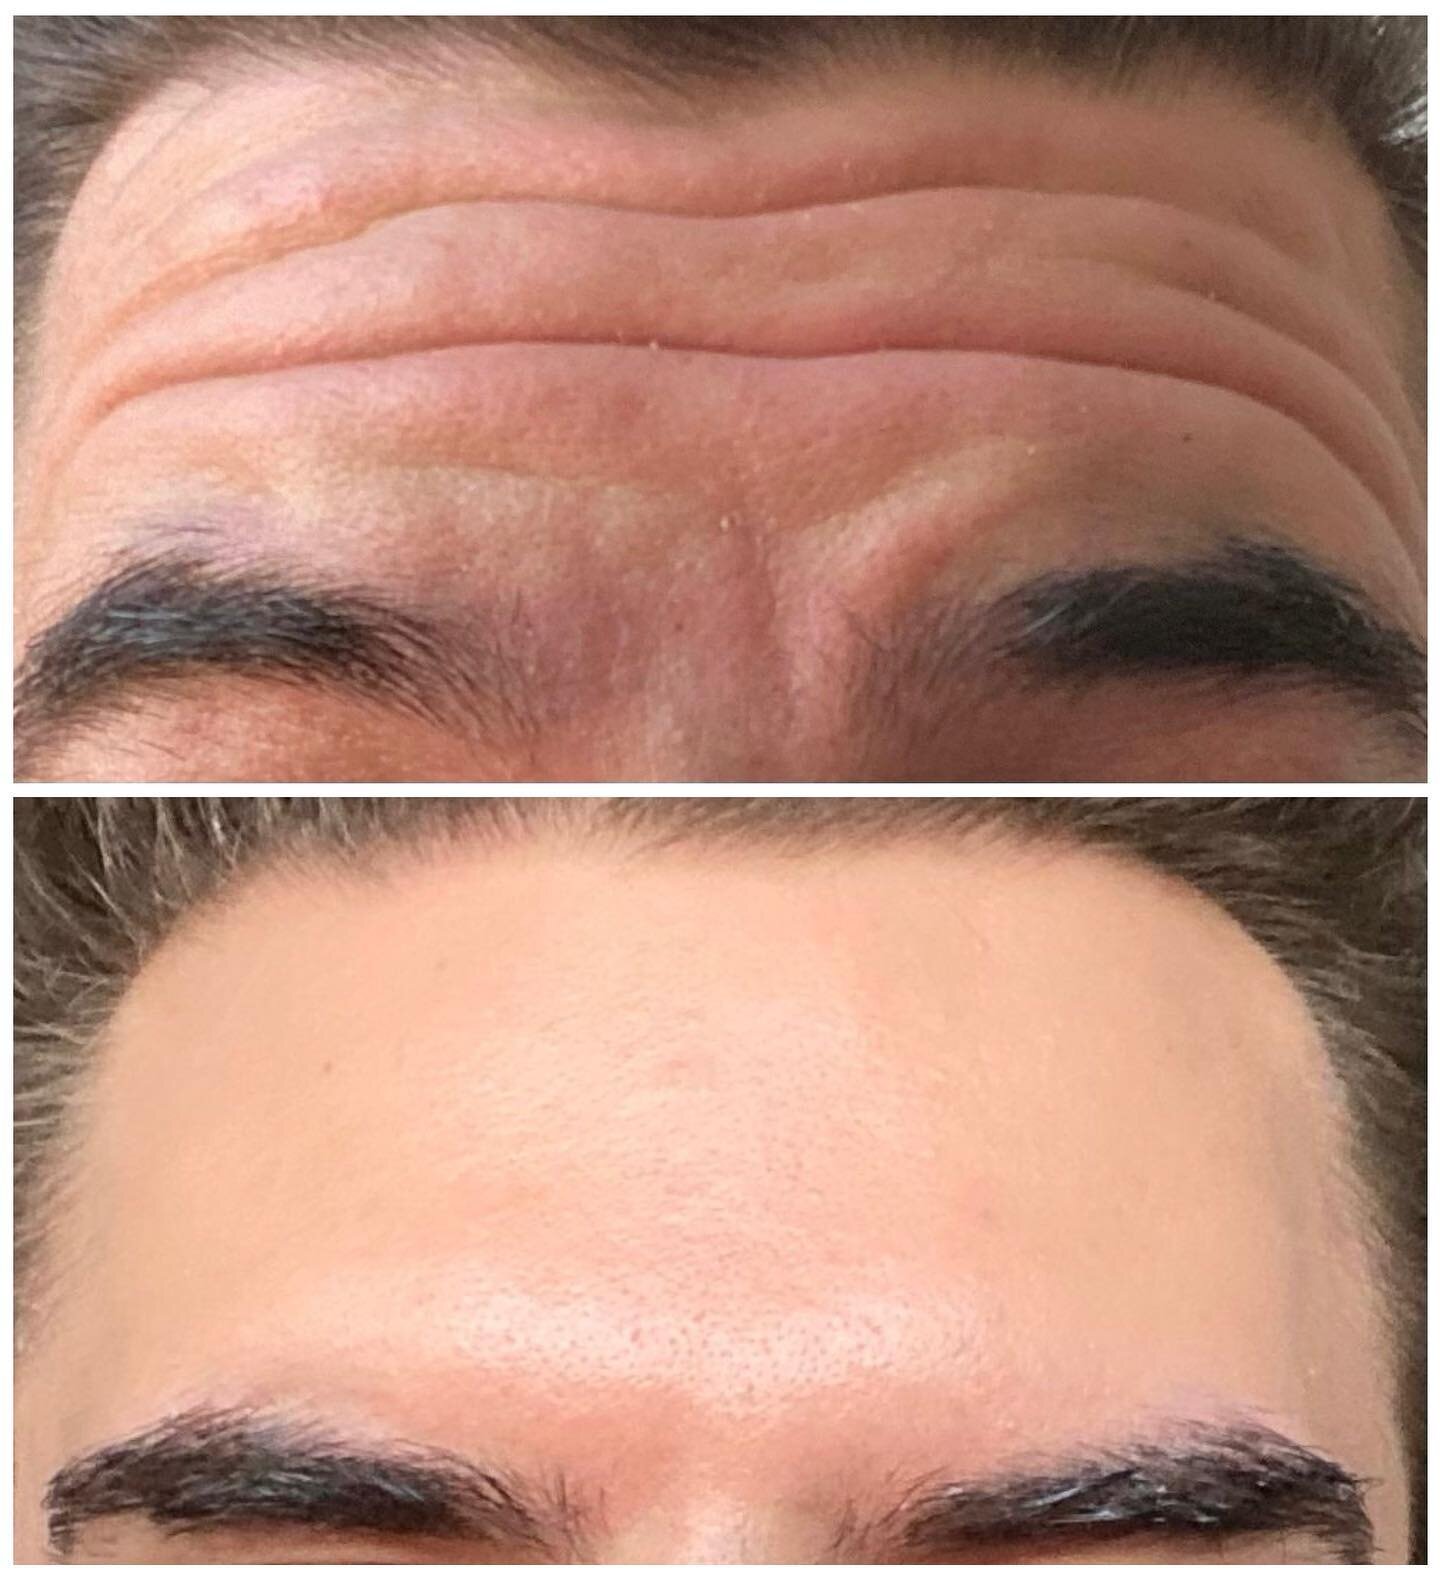 Say goodbye to unwanted wrinkles with neuromodulators! Our happy customer is delighted with his results. Embrace a smoother complexion today! 
.
.
.
.
.
#wrinklereduction #wrinkleprevention #youthfulglow #neuromodulators #xeomin #medicalaesthetics #A